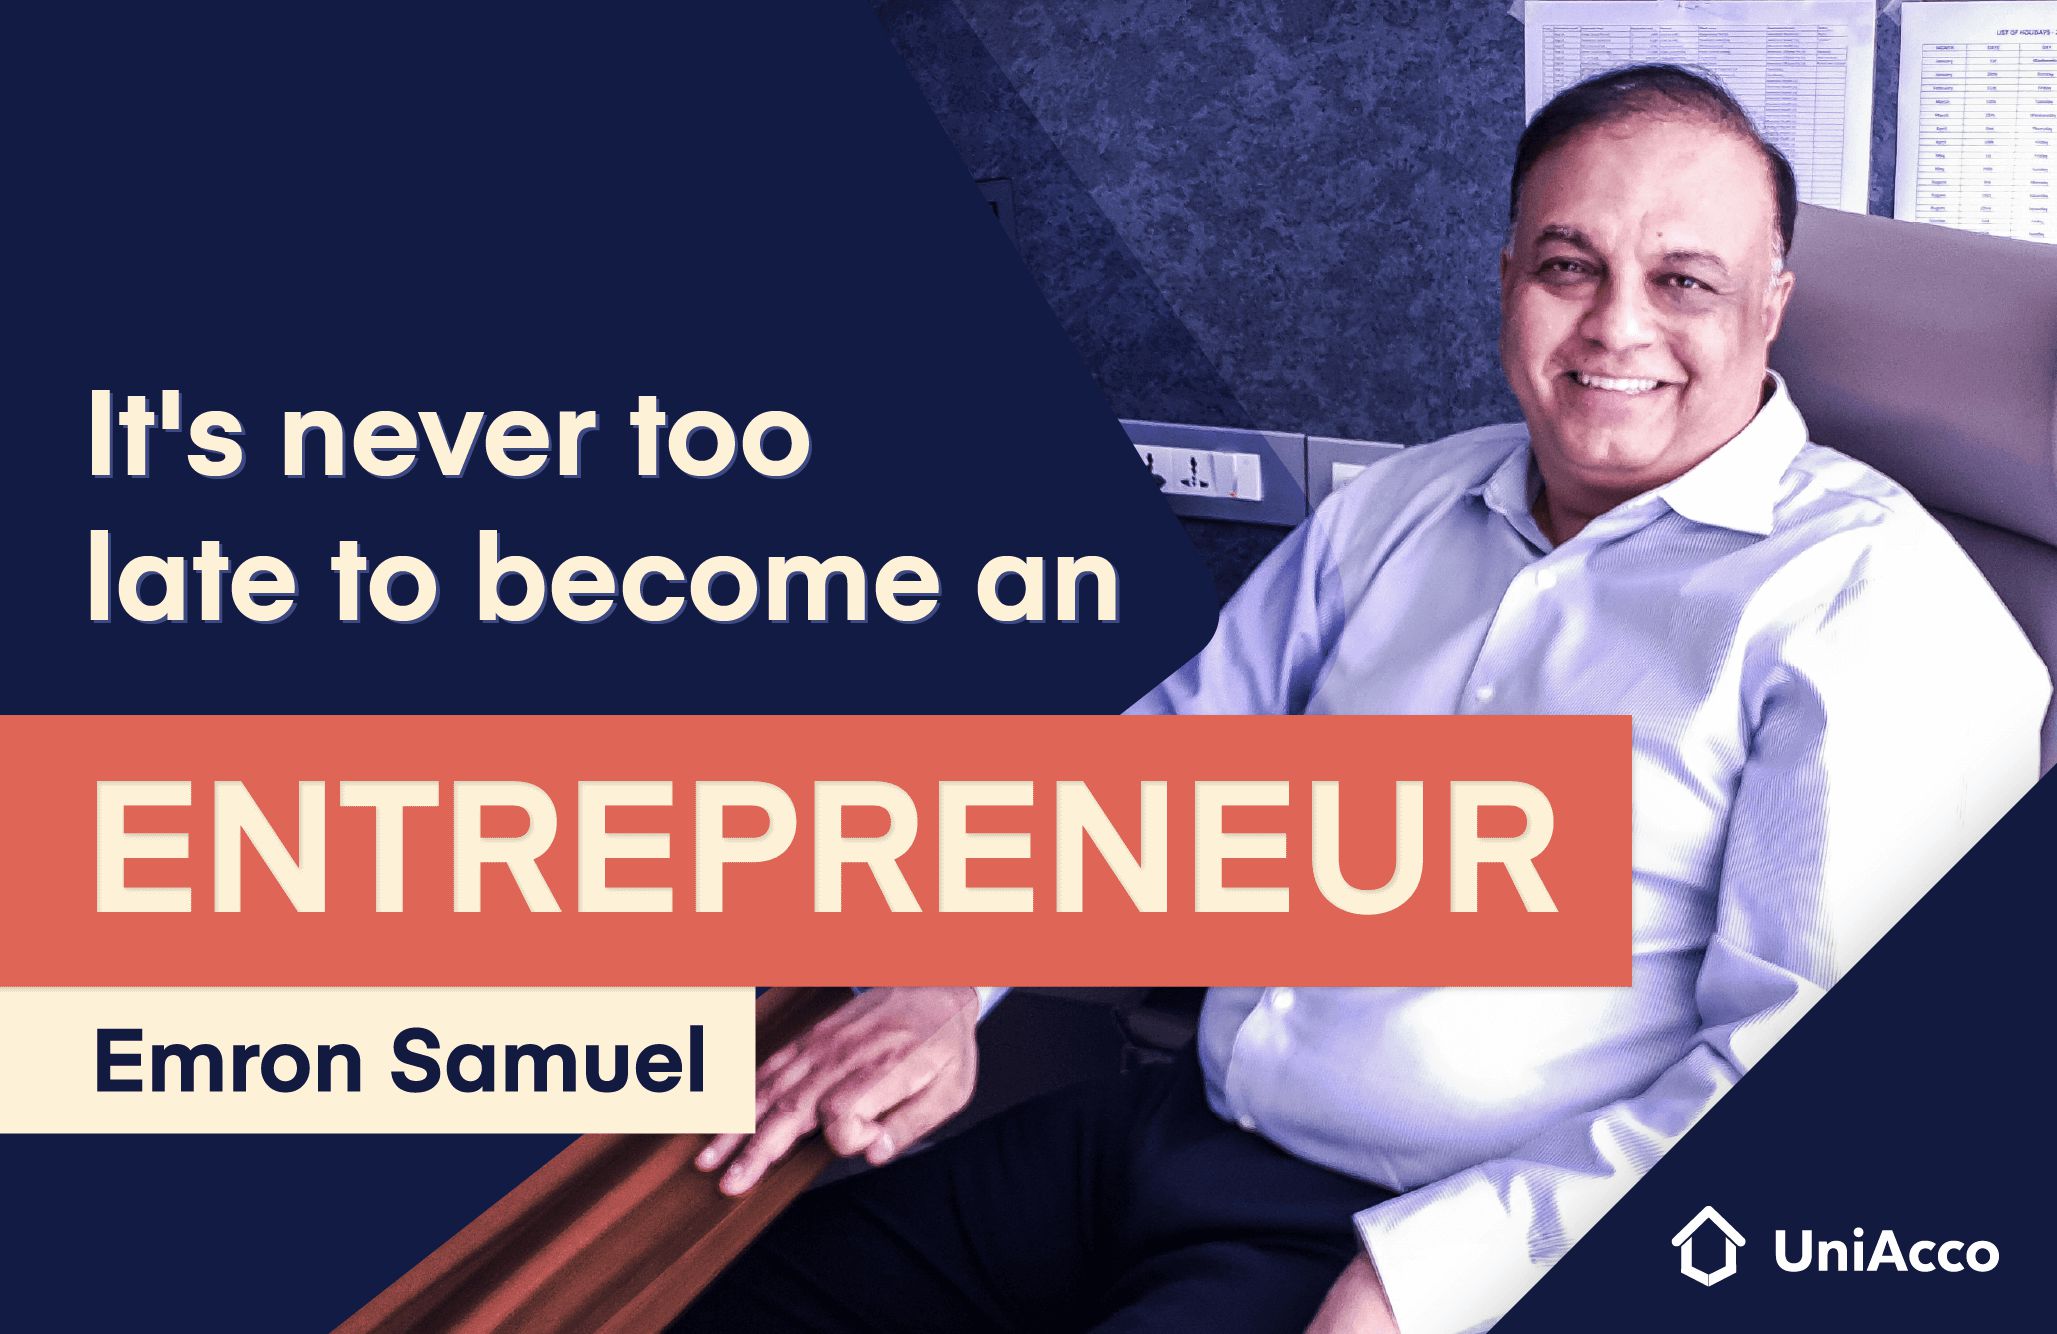 It’s never too late to become an Entrepreneur